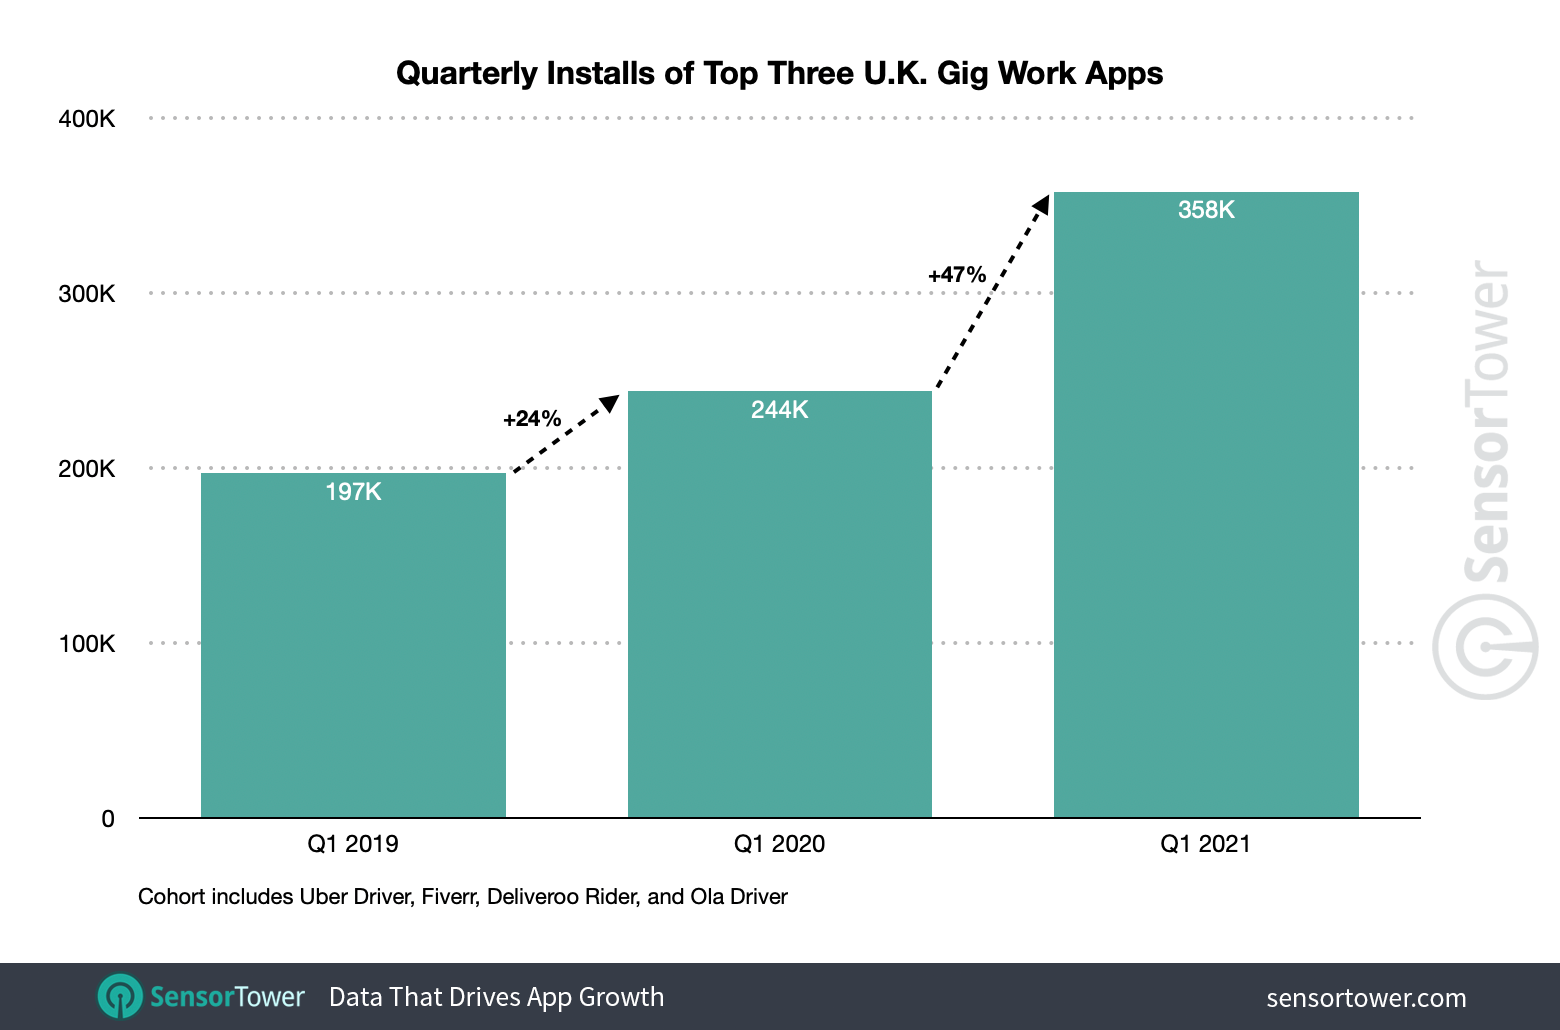 Adoption of the top gig work apps in the U.K. nearly doubled year-over-year in Q1 2021 when compared to the growth in Q1 2020.